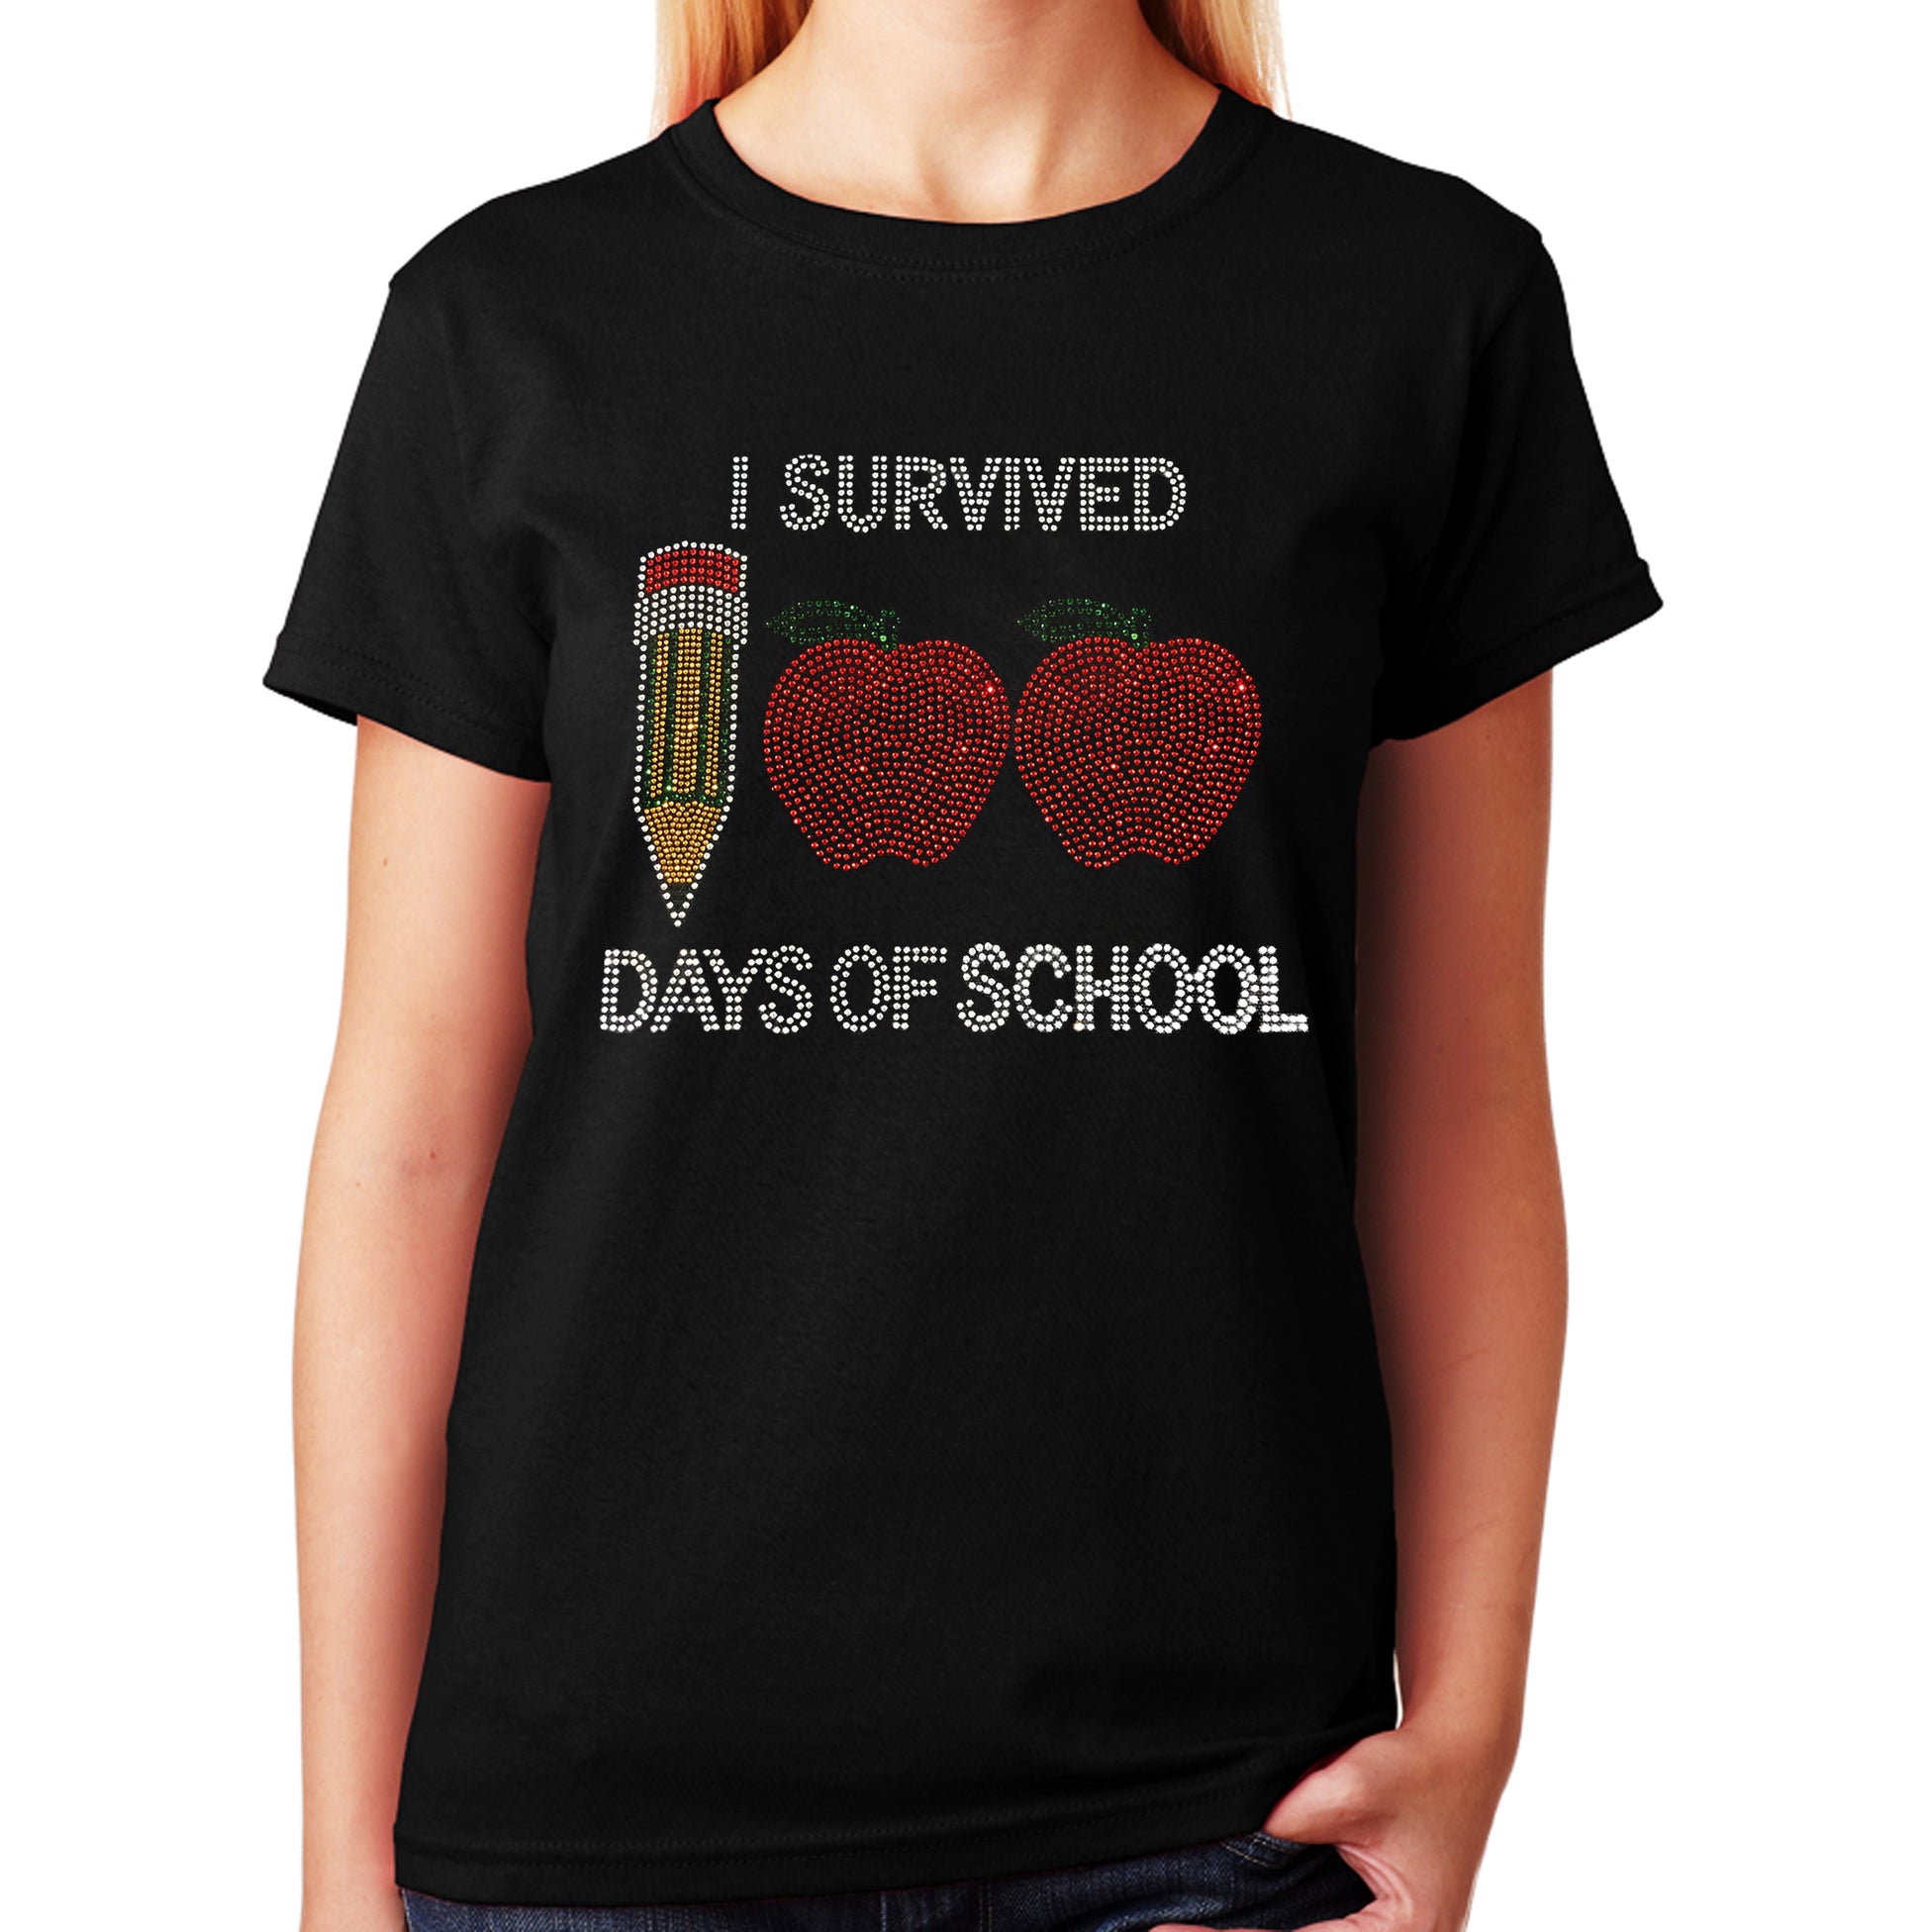 Women's / Unisex T-Shirt with I Survived 100 Days of School in Rhinestones